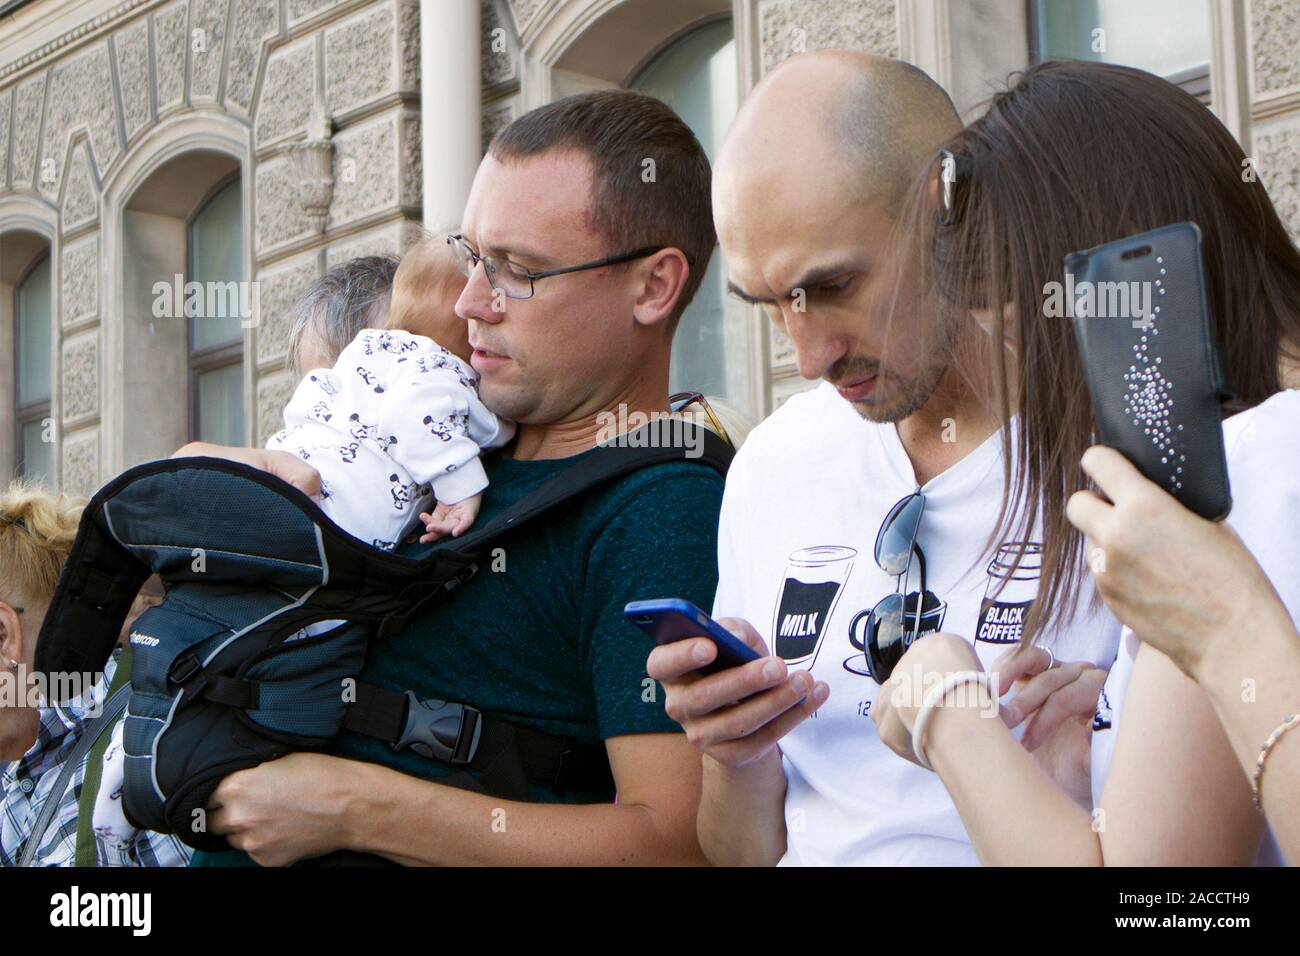 Saint-Petersburg, Russia, July 28 2019. Man with baby between crowd of people during Navy Day celebration Stock Photo